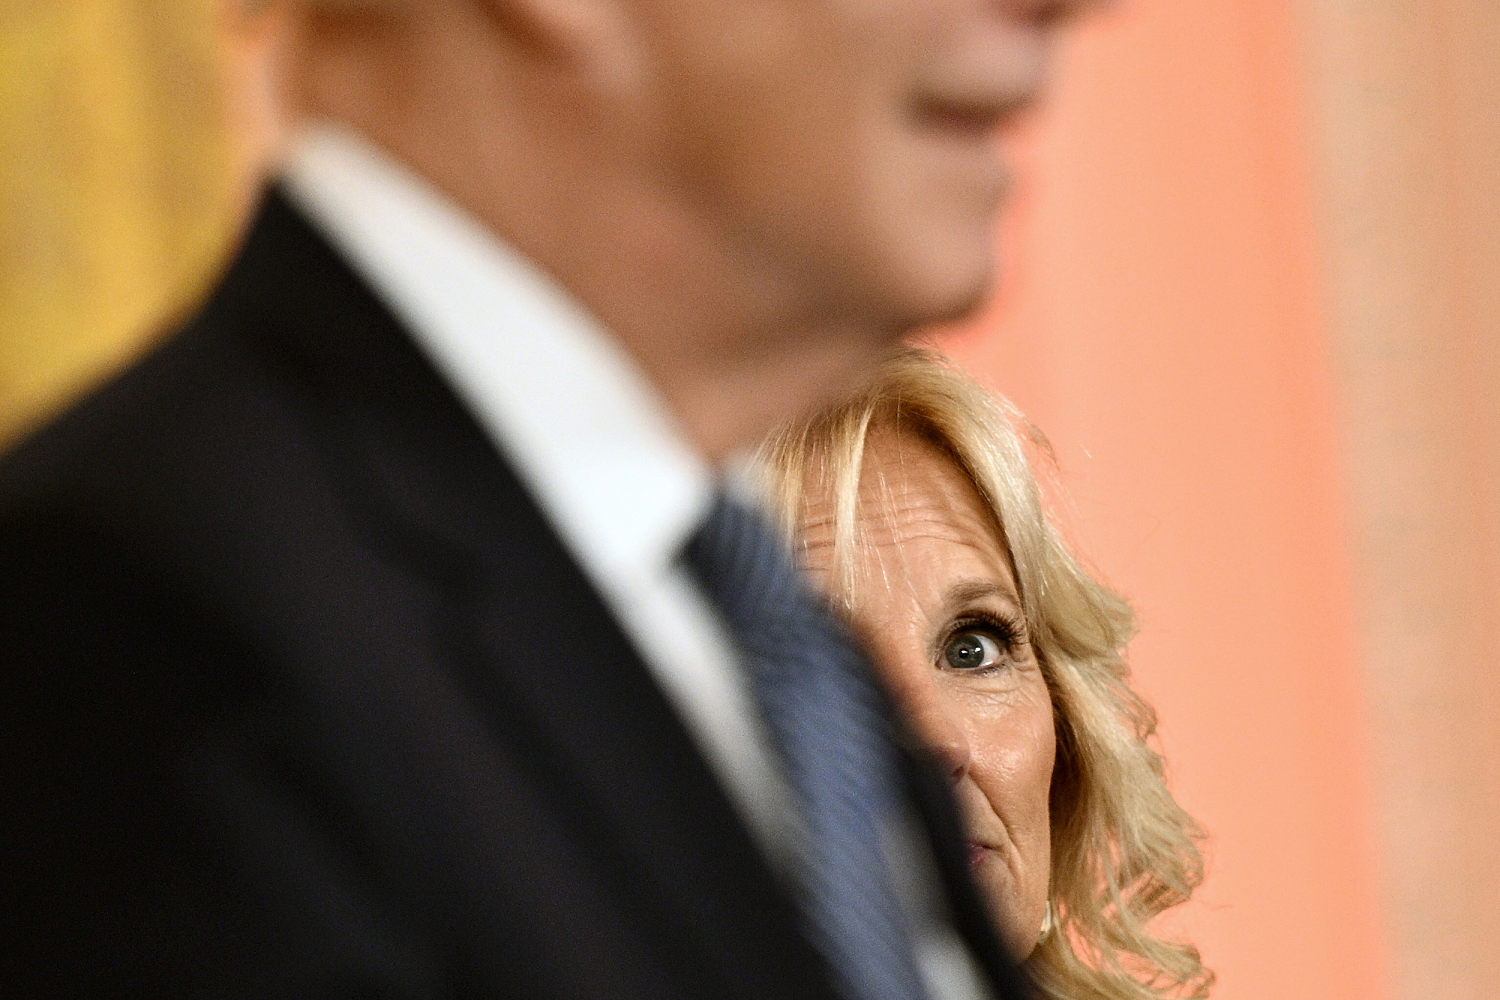 Why Jill Biden stepped into a more public role responding to the special counsel’s report